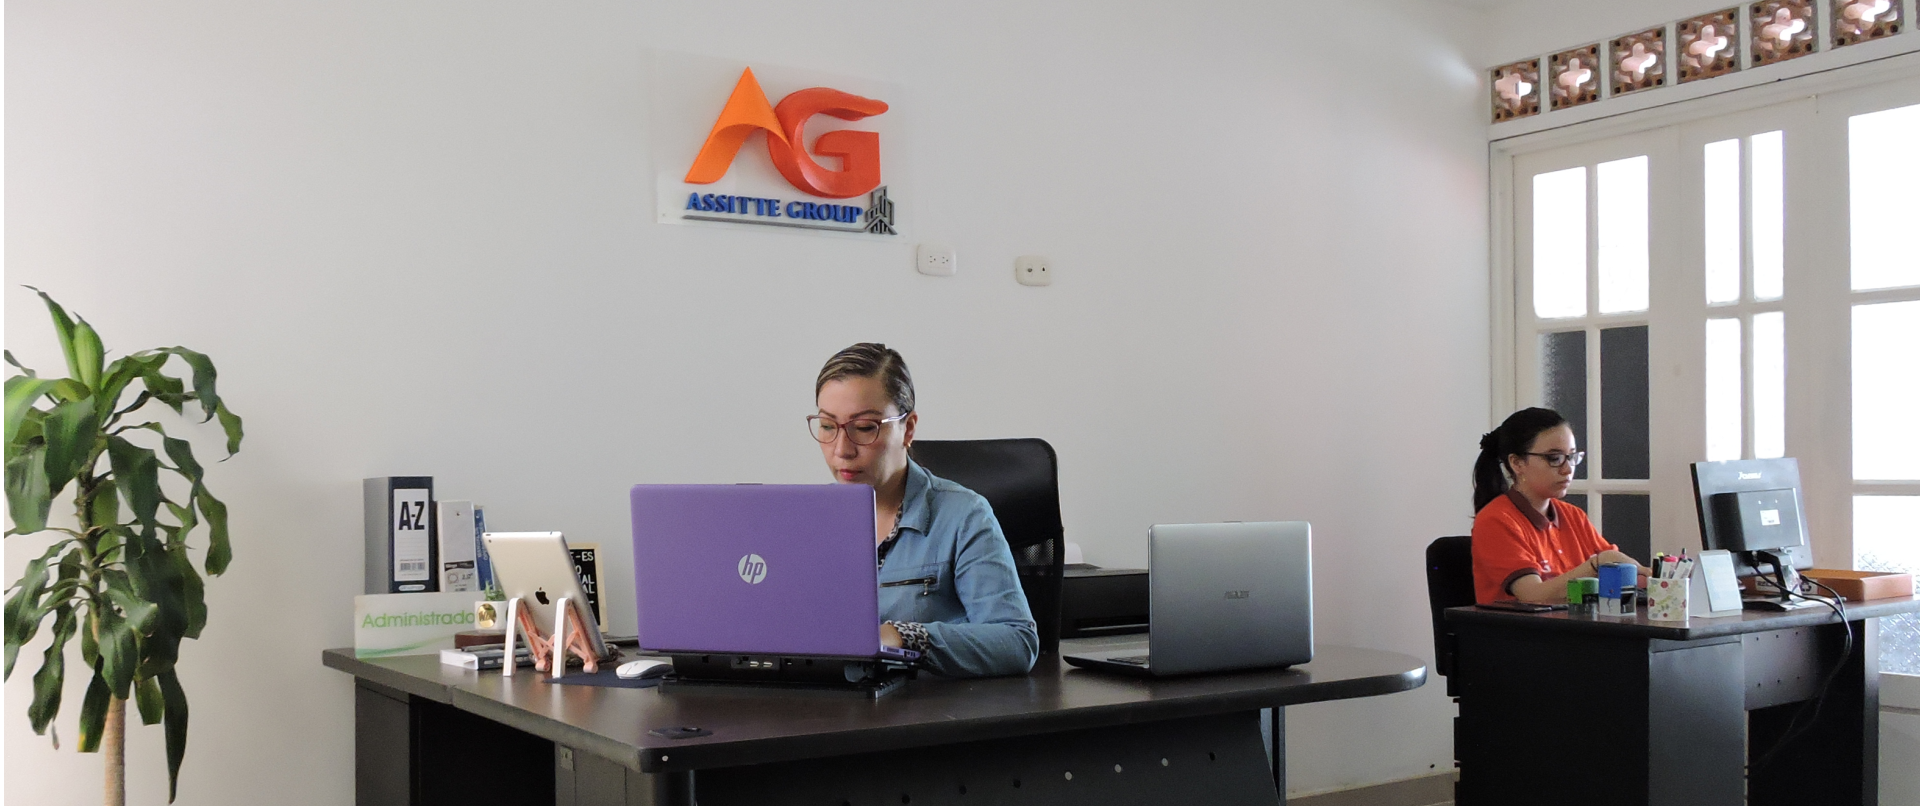 Assite Group Ibague, Tolima